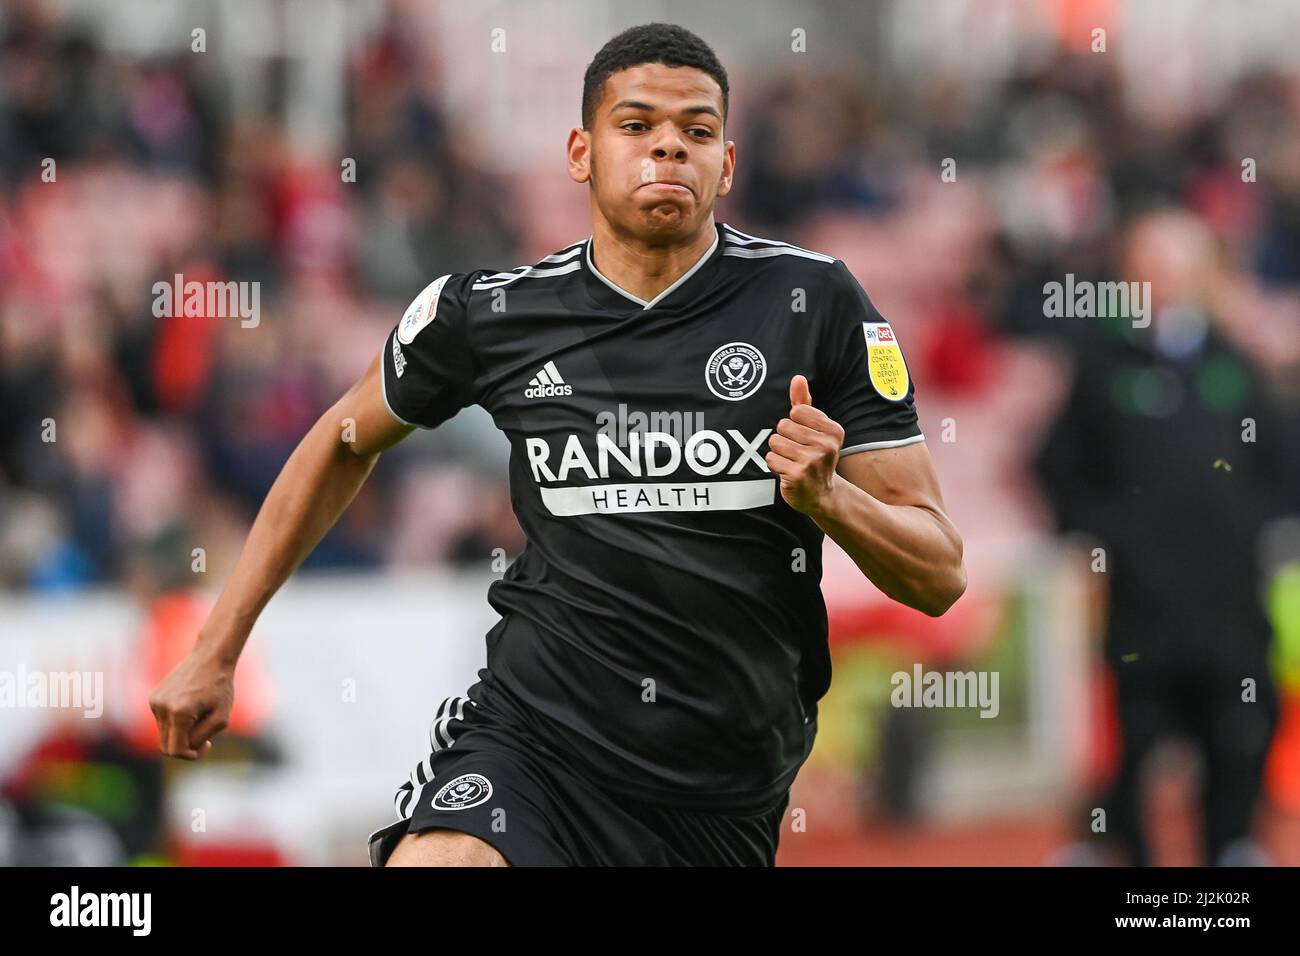 William Osula #32 of Sheffield United during the game in, on 4/2/2022. (Photo by Craig Thomas/News Images/Sipa USA) Credit: Sipa USA/Alamy Live News Stock Photo